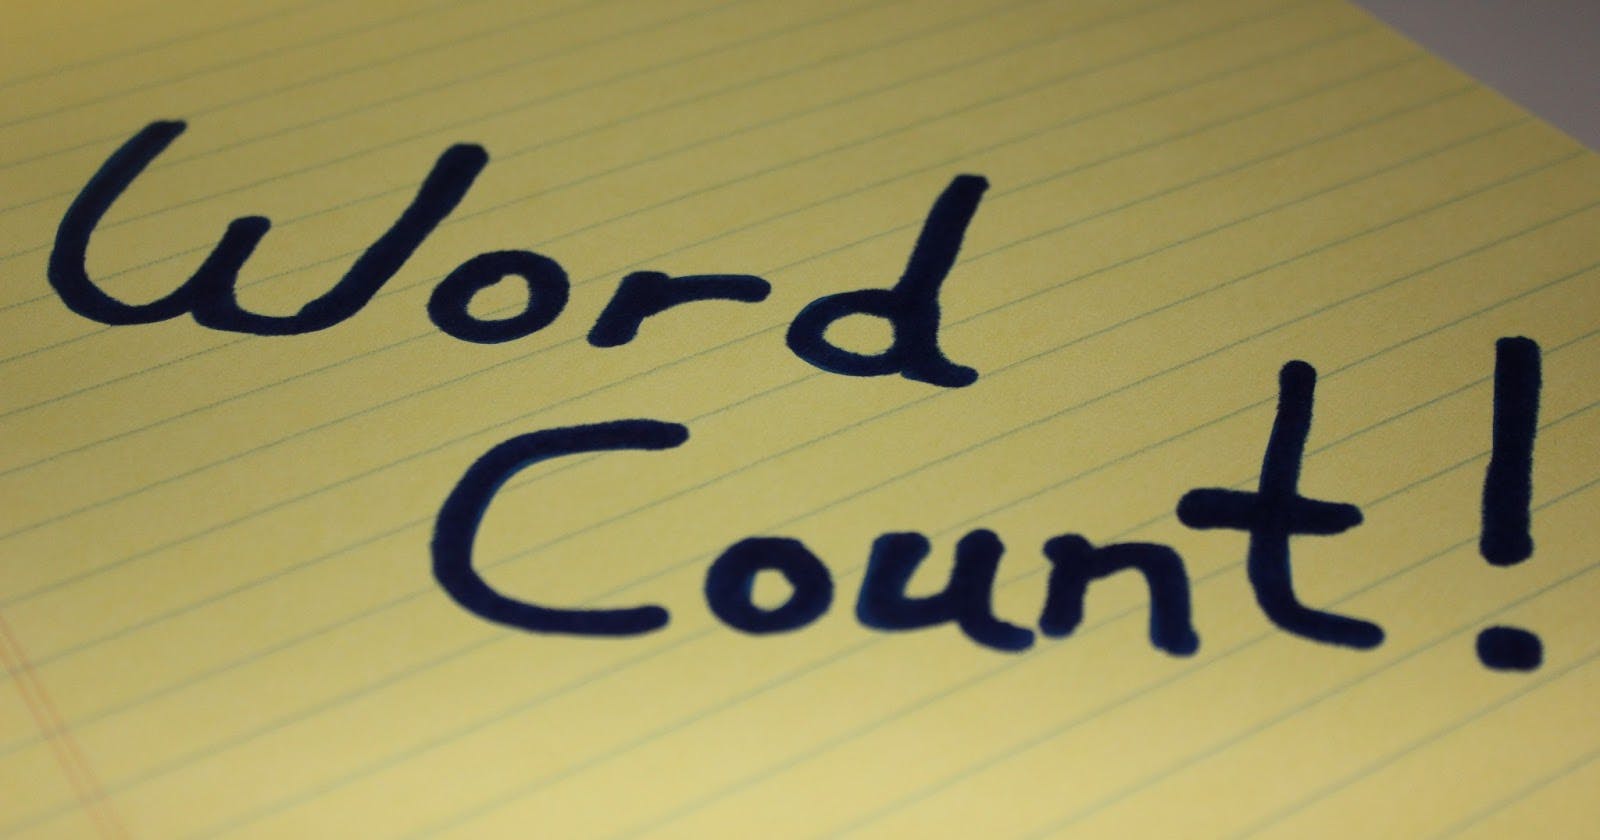 Word Count Program with C++